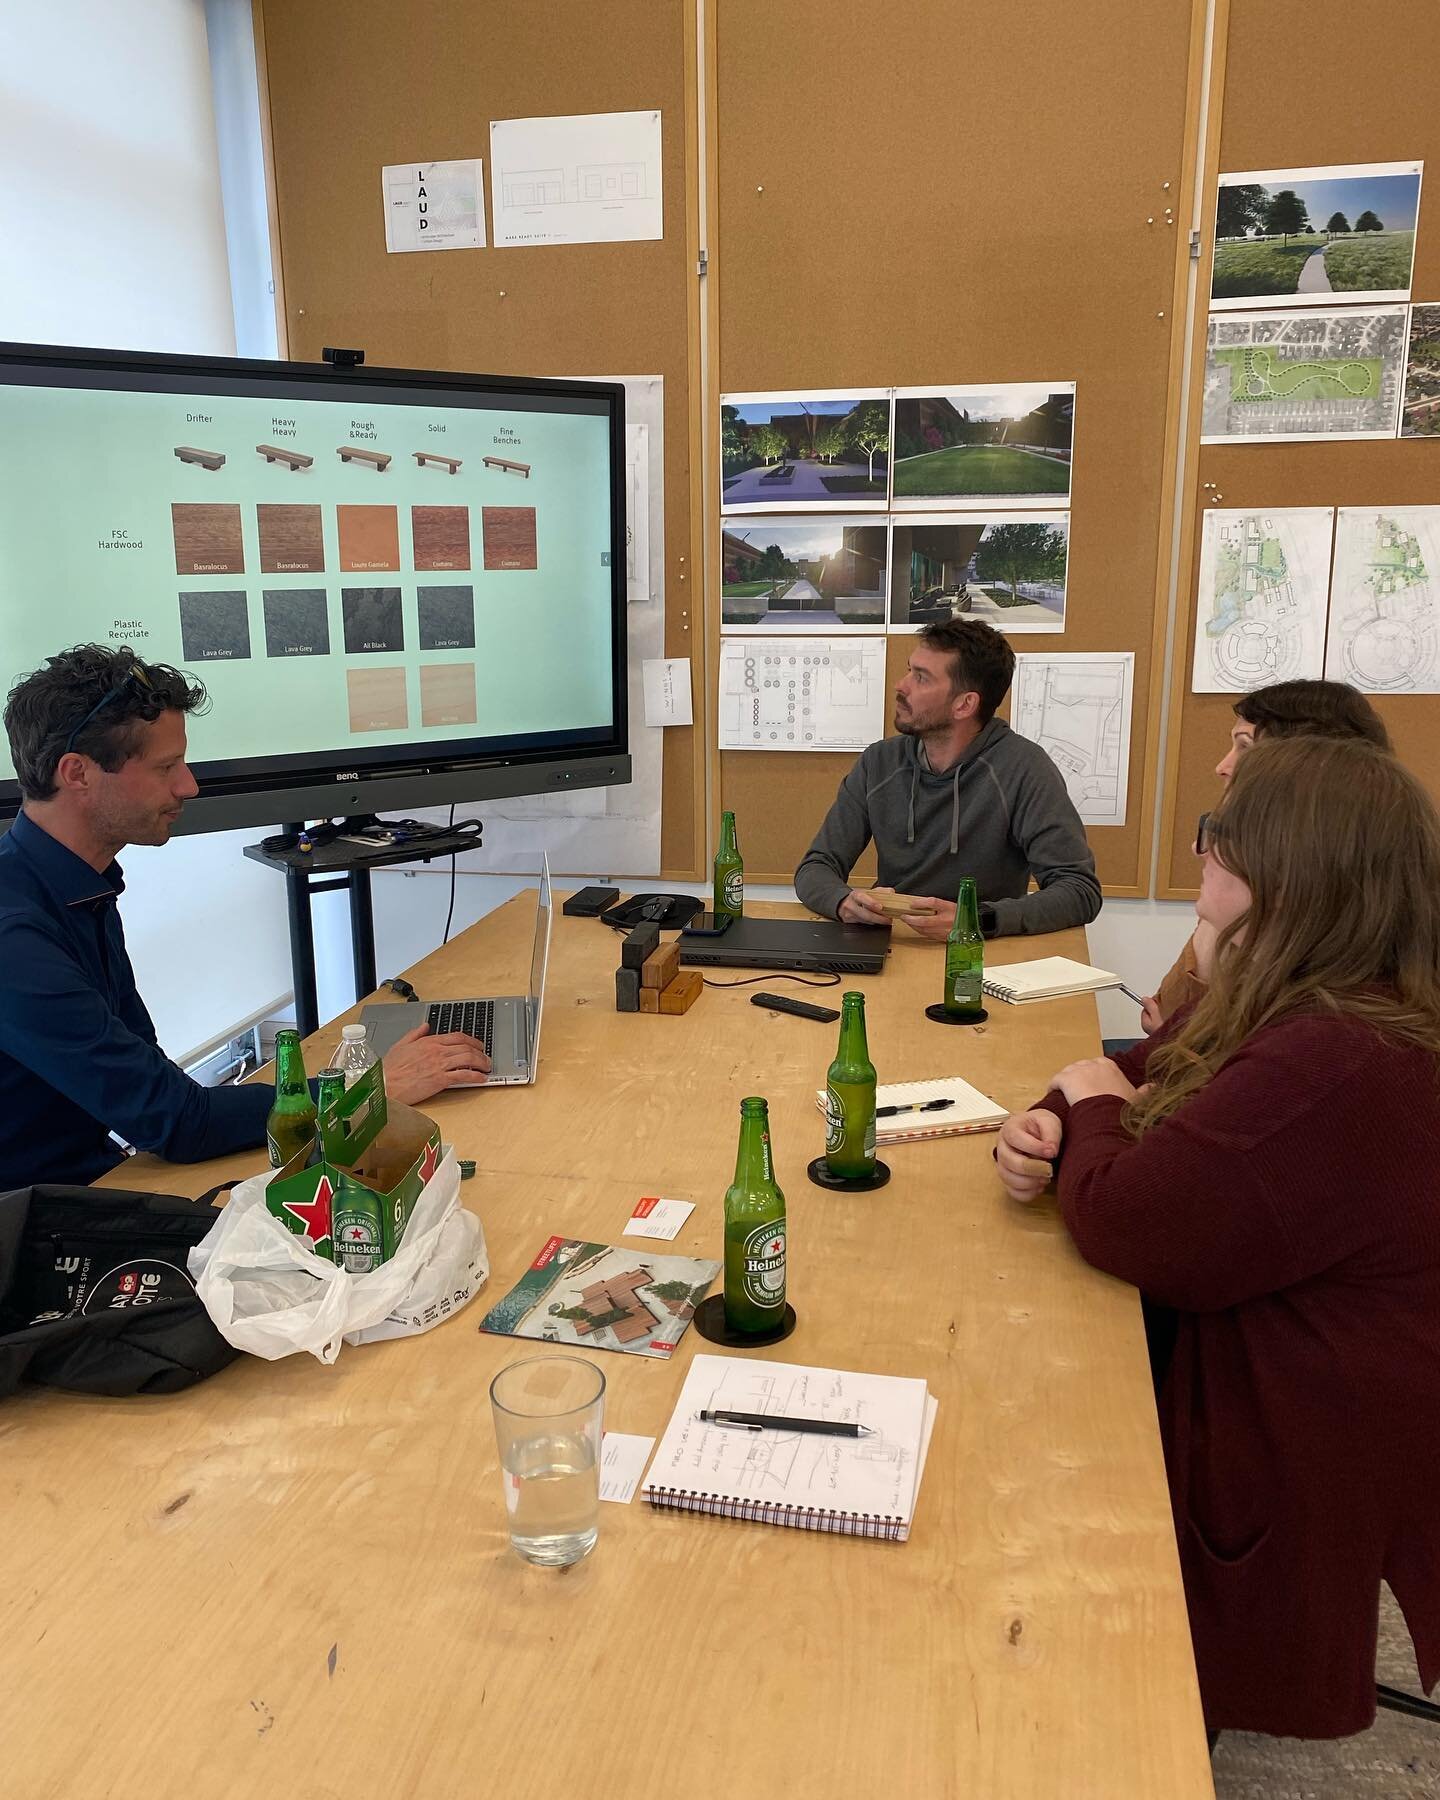 Friday afternoon Heinnekens and product updates with @streetlifedesign.